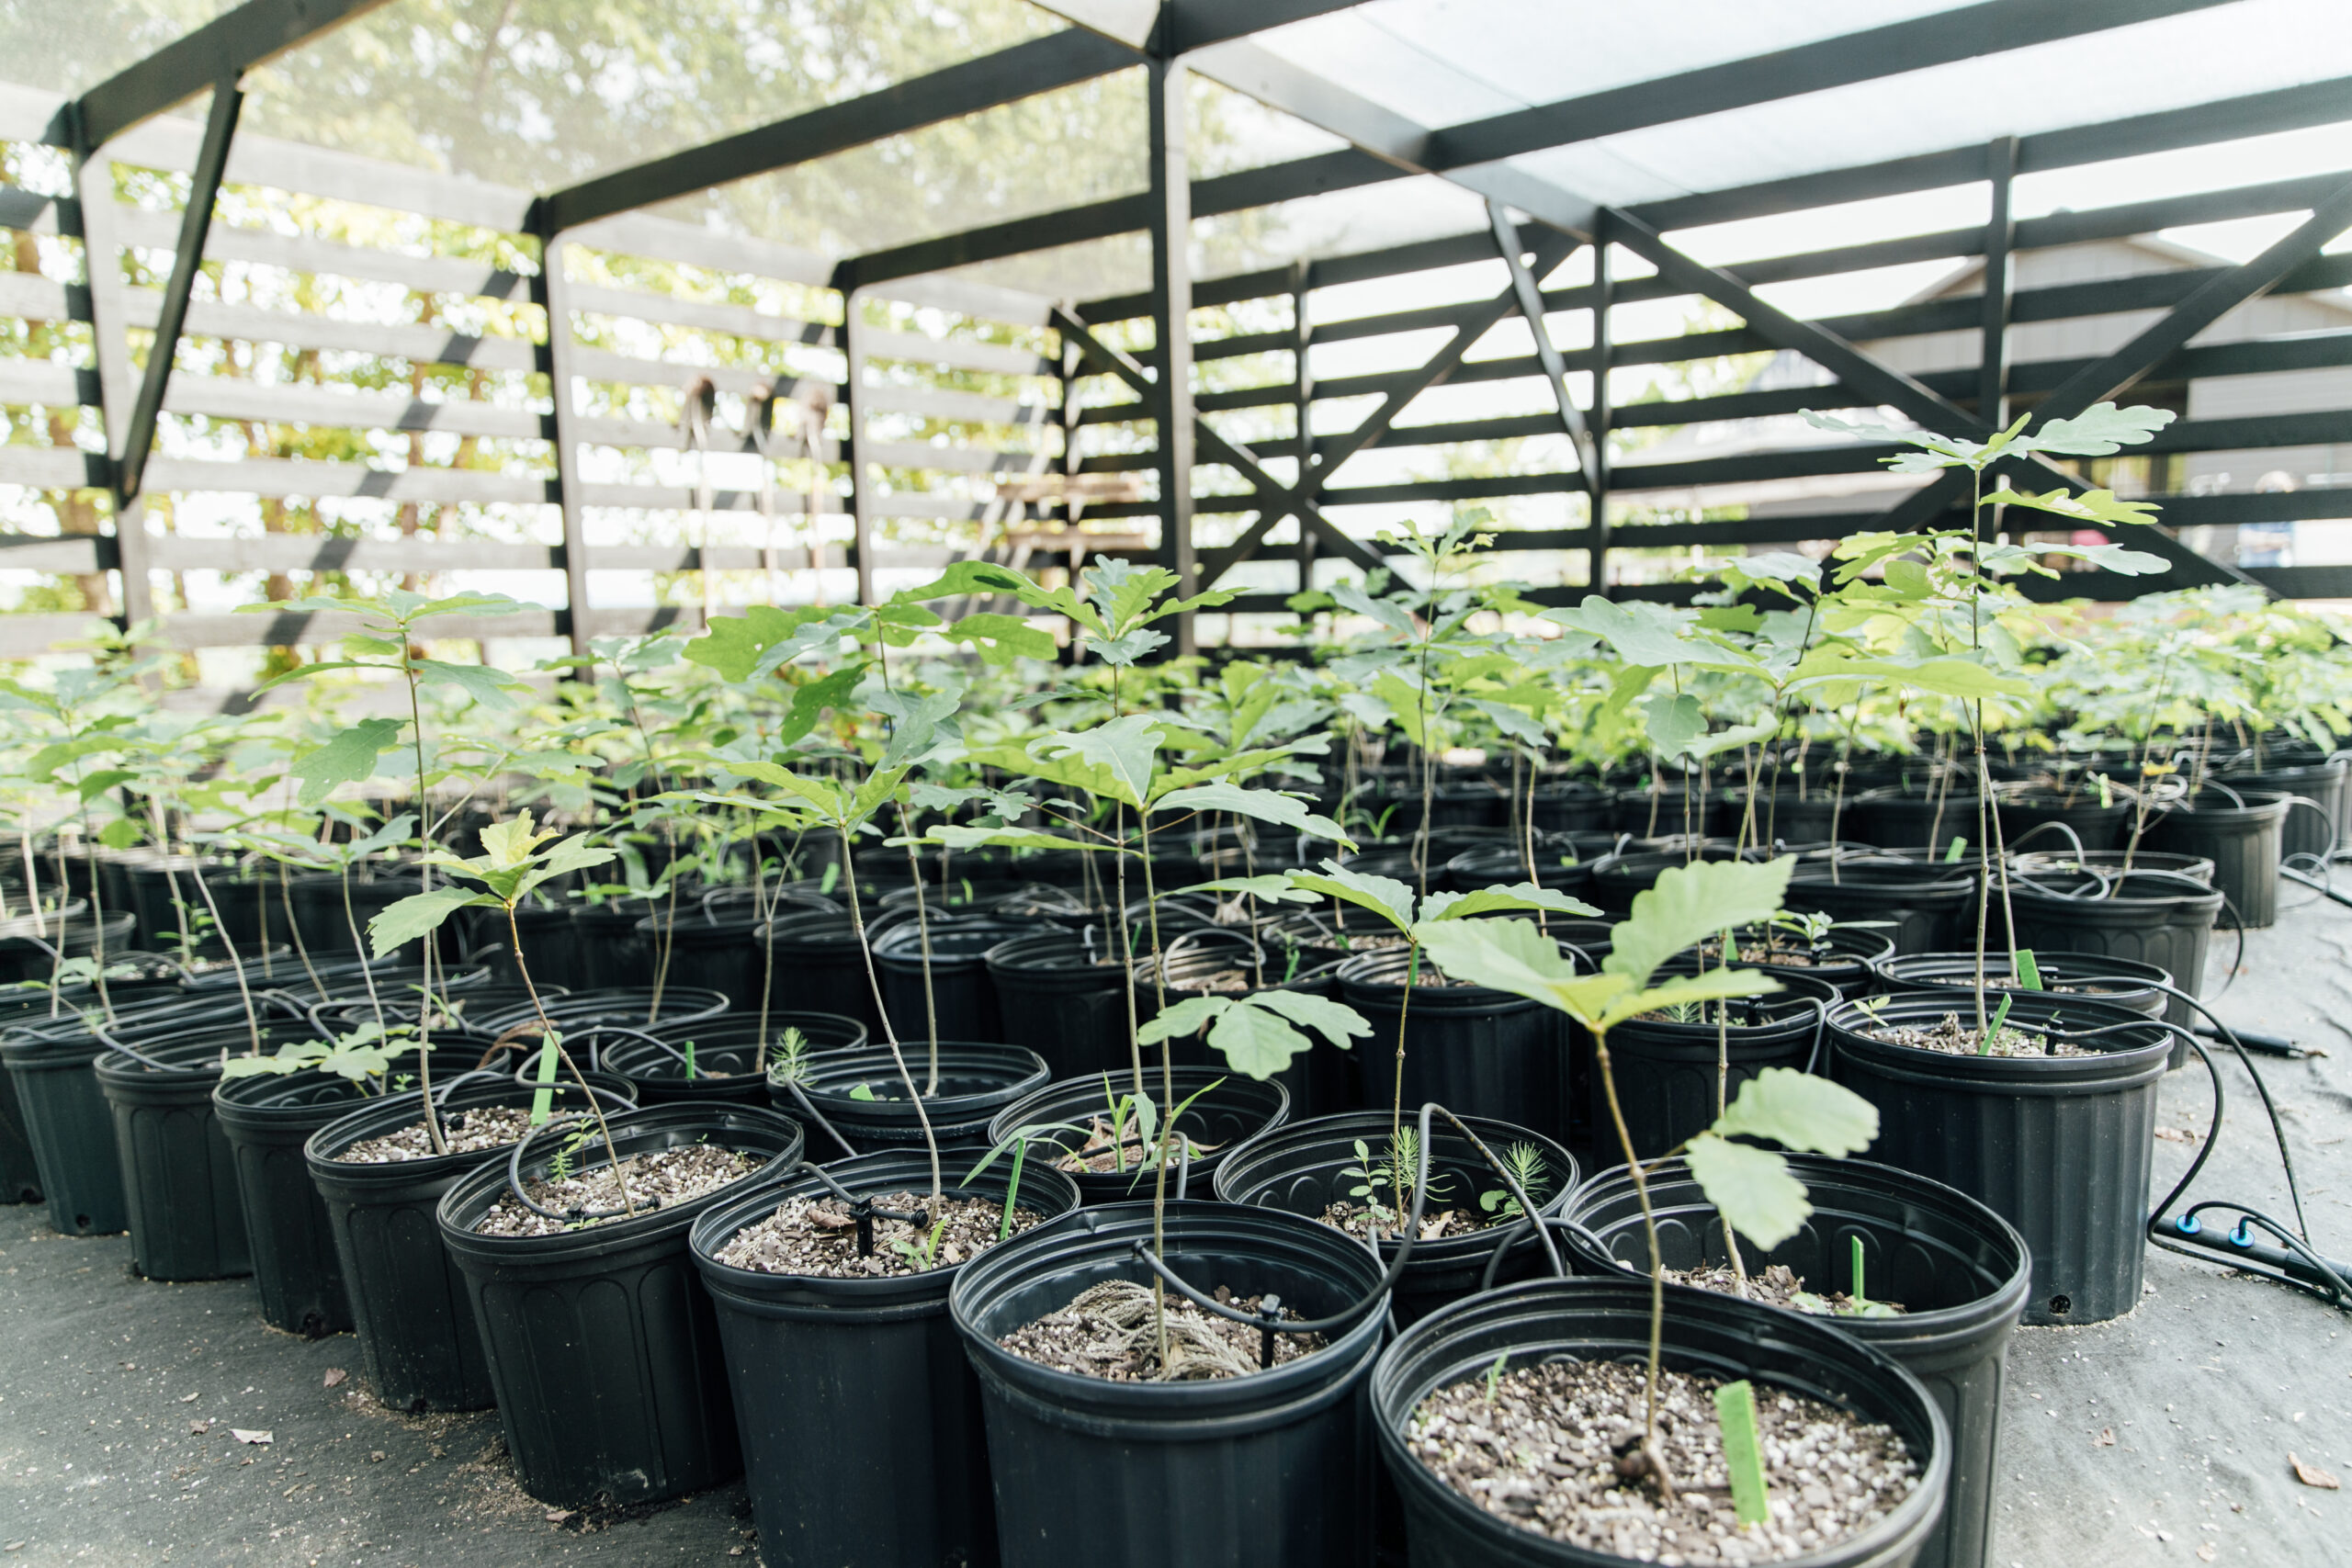 Rows of young tree saplings in black nursery pots under a shaded greenhouse structure.